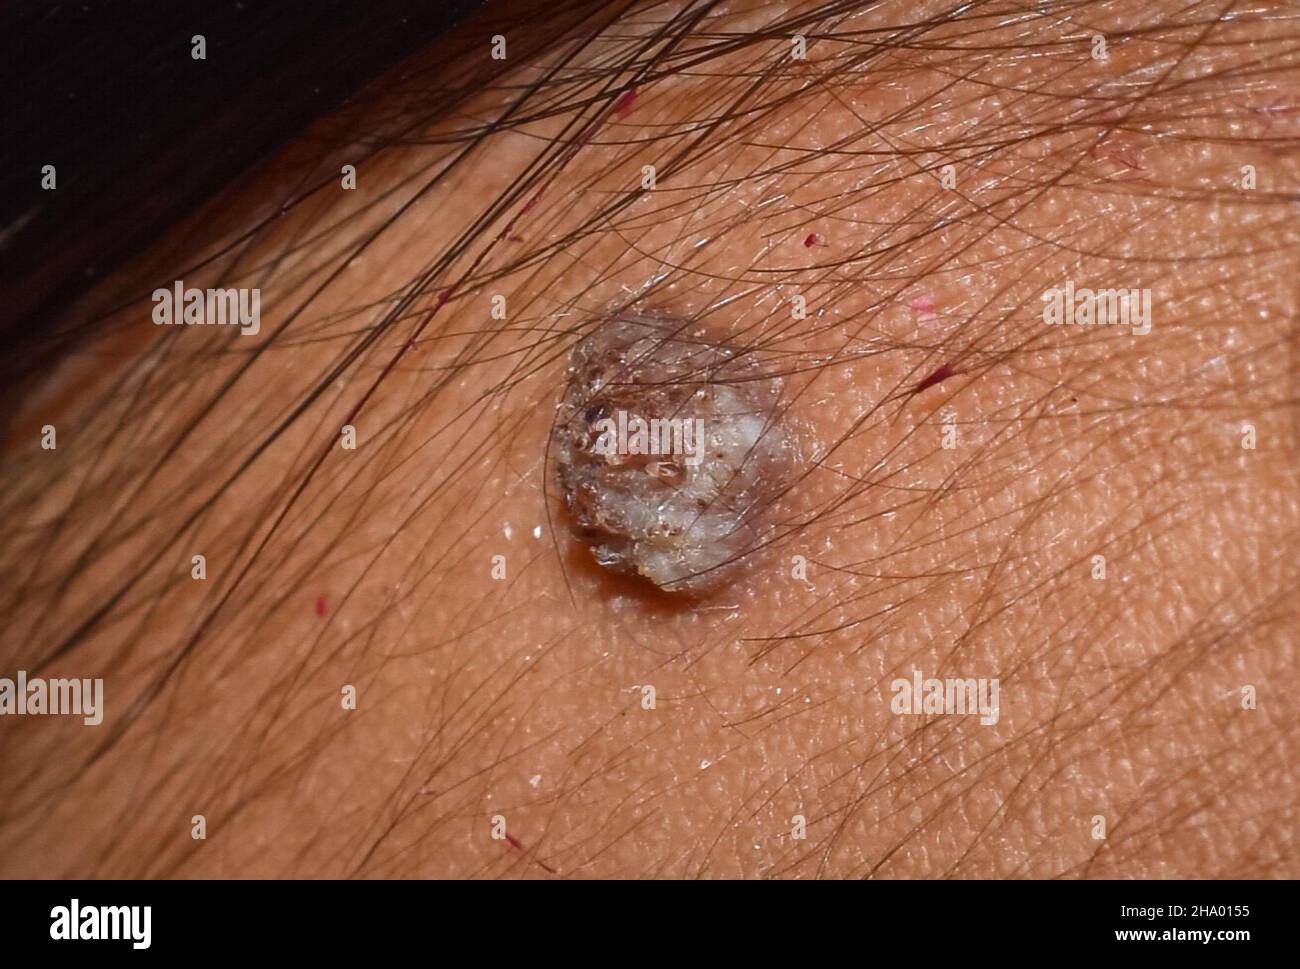 Common wart at the forehead of Asian, Myanmar young man. It is a small, hard, benign growth on the skin, caused by human papilloma virus. Isolated on Stock Photo